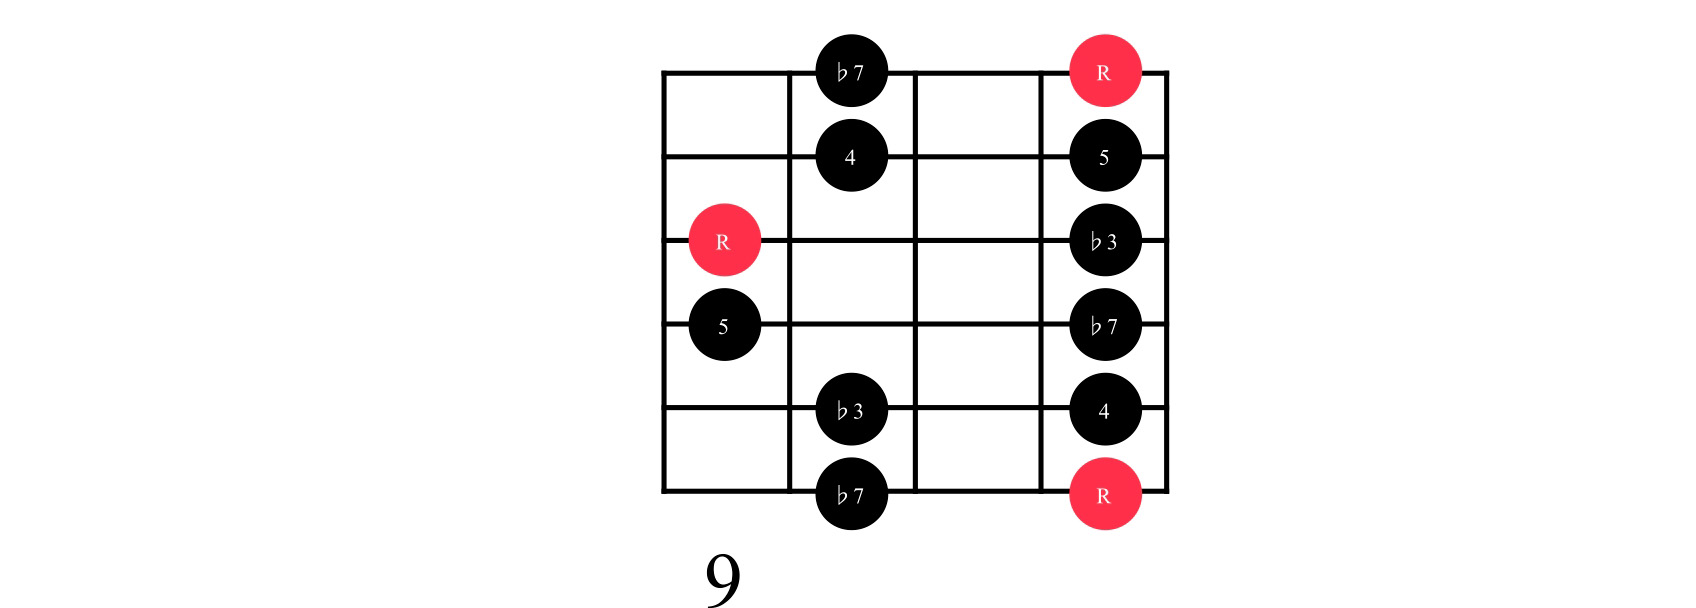 Guitar chord diagram for E Minor Pentatonic Box 5, highlighting root notes (R) in red, intervals marked, and fret number 9 at the bottom, showing patterns for guitar playing.